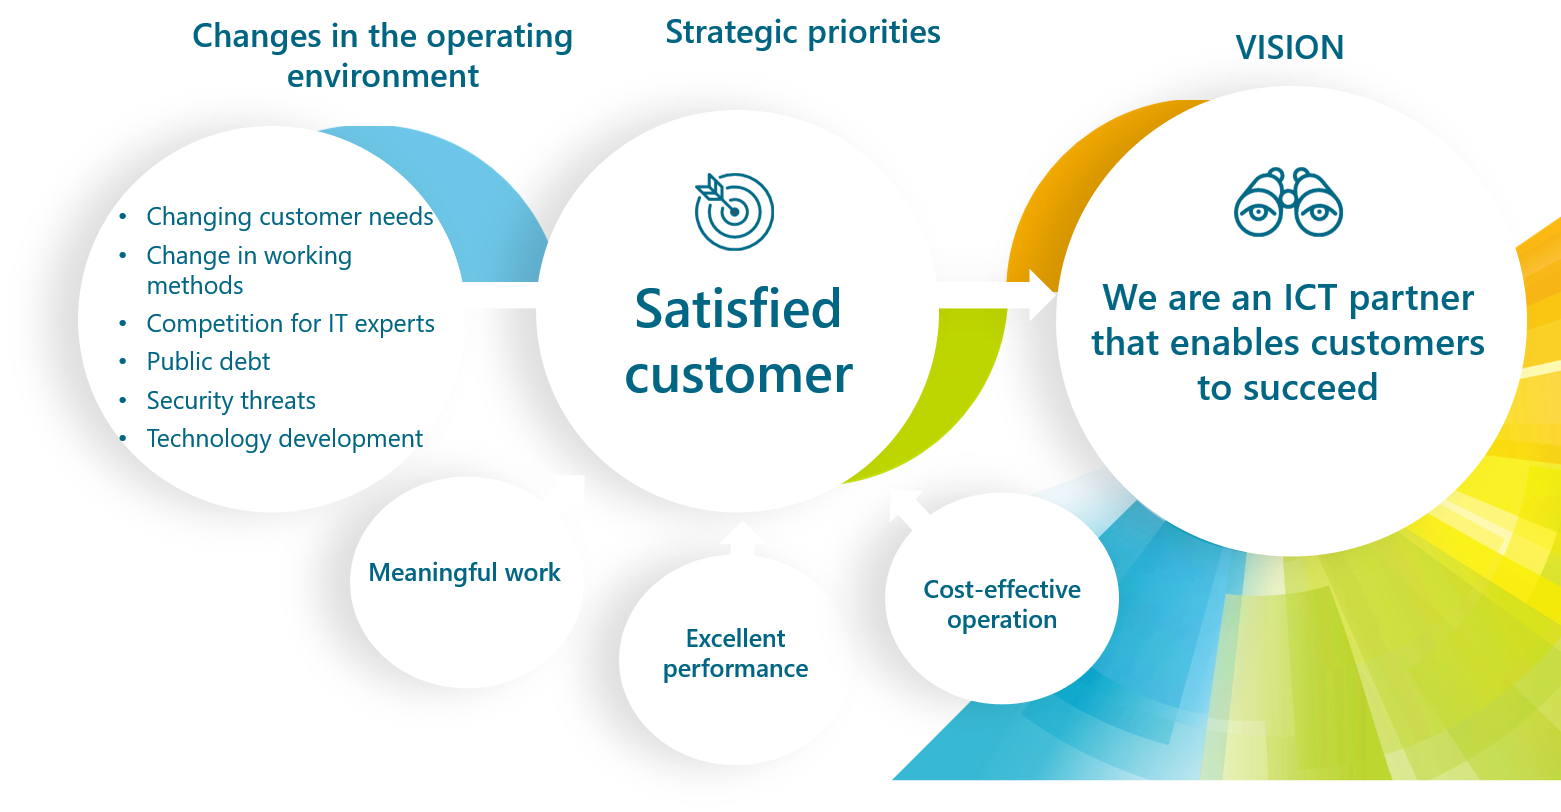 The four main objectives of the strategy are satisfied customer, meaningful work excellent, functional capacity and cost-effective operation.